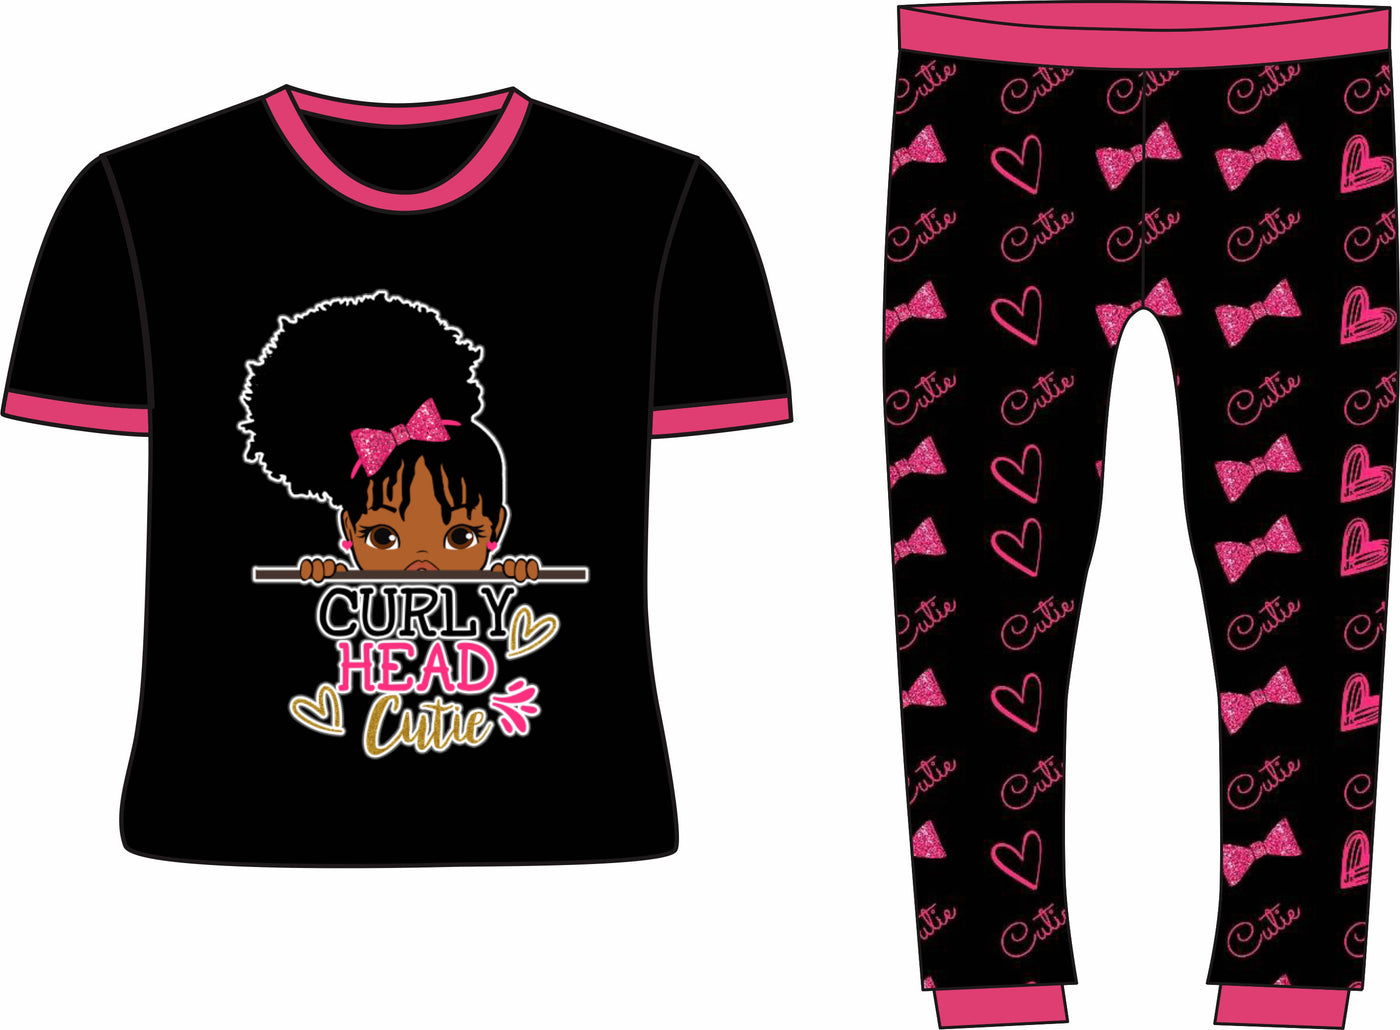 CURLY HEAD CUTIE HAIRSTYLES PAJAMA 2 PC SET SIZE TODDLER 2T - 14 BLACK